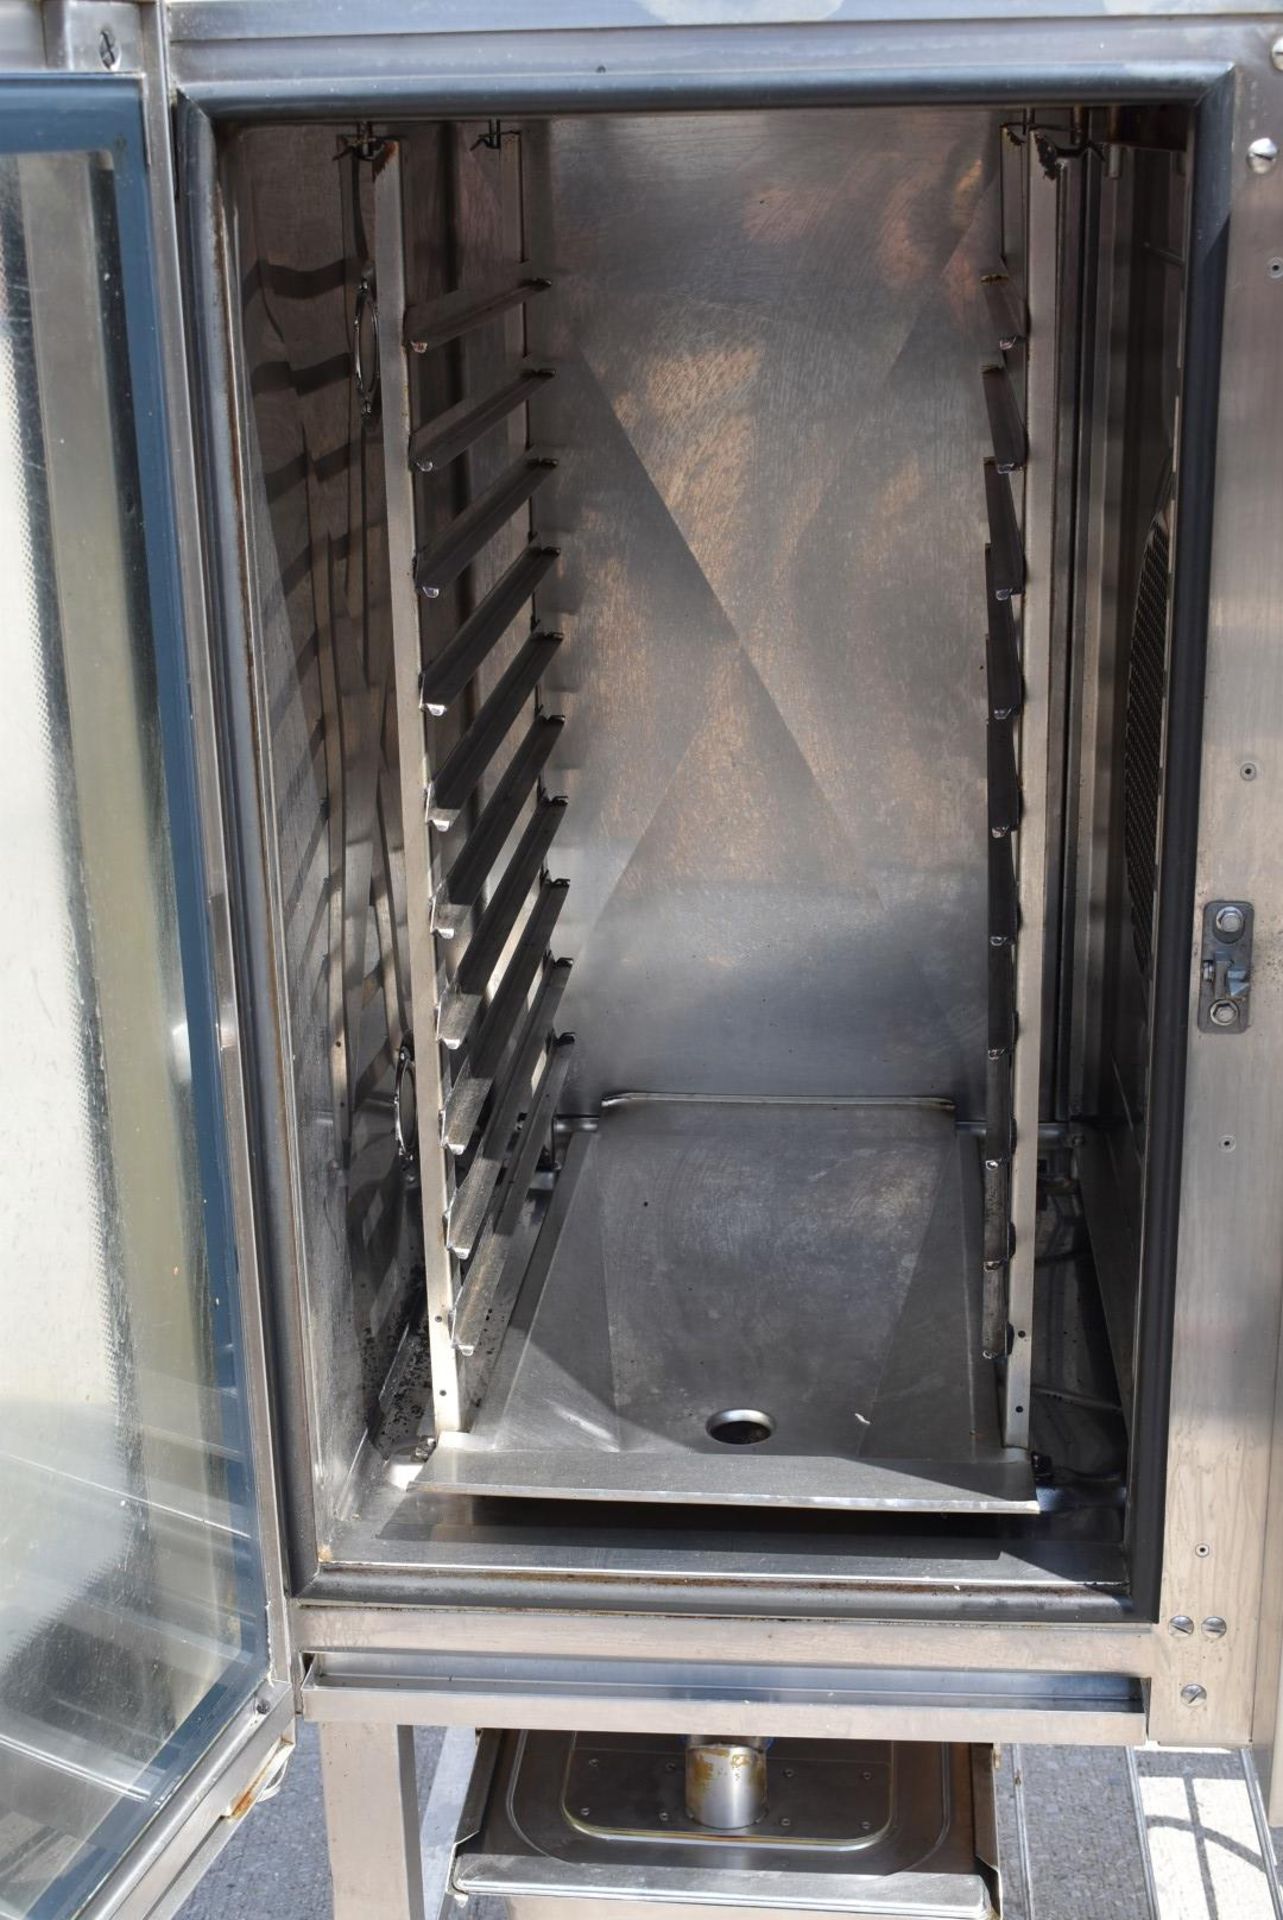 1 x Houno CPE 1.06 Electric Combi Oven - 3 Phase Combi Oven With Various Pre-Set Cooking Options - Image 10 of 14